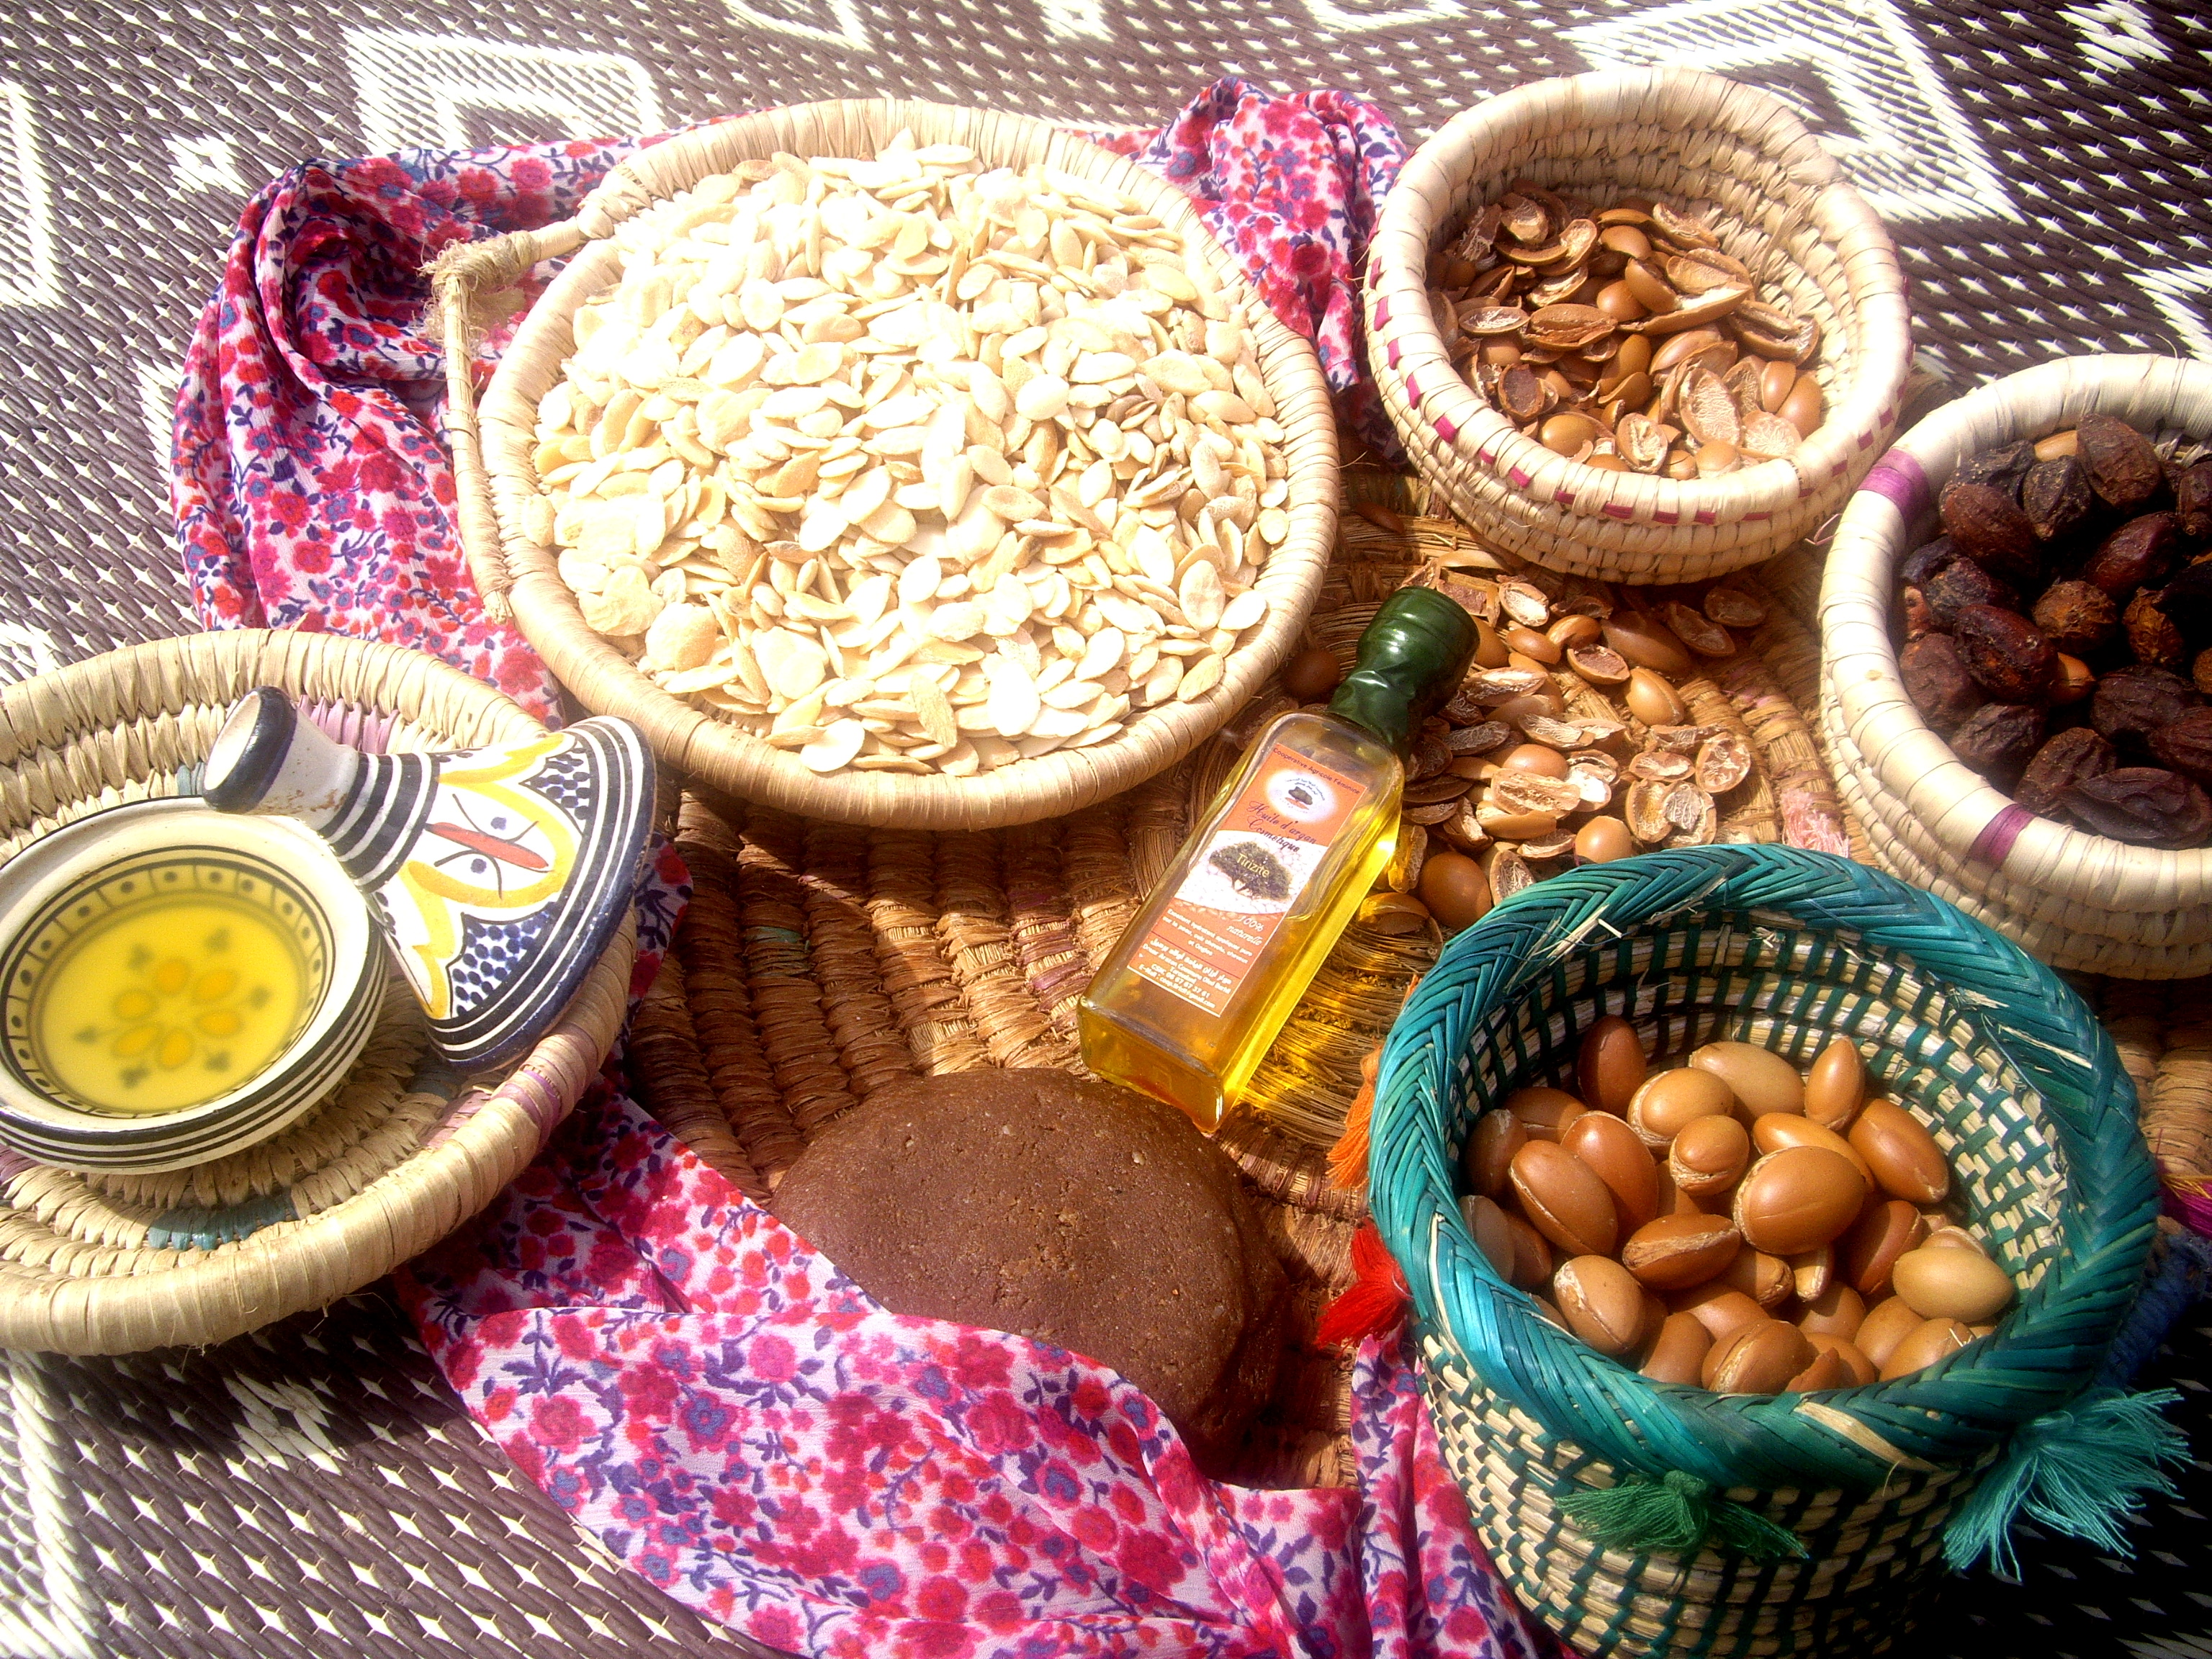 From nuts, kernels to Argan oil. At women cooperative in Arazane